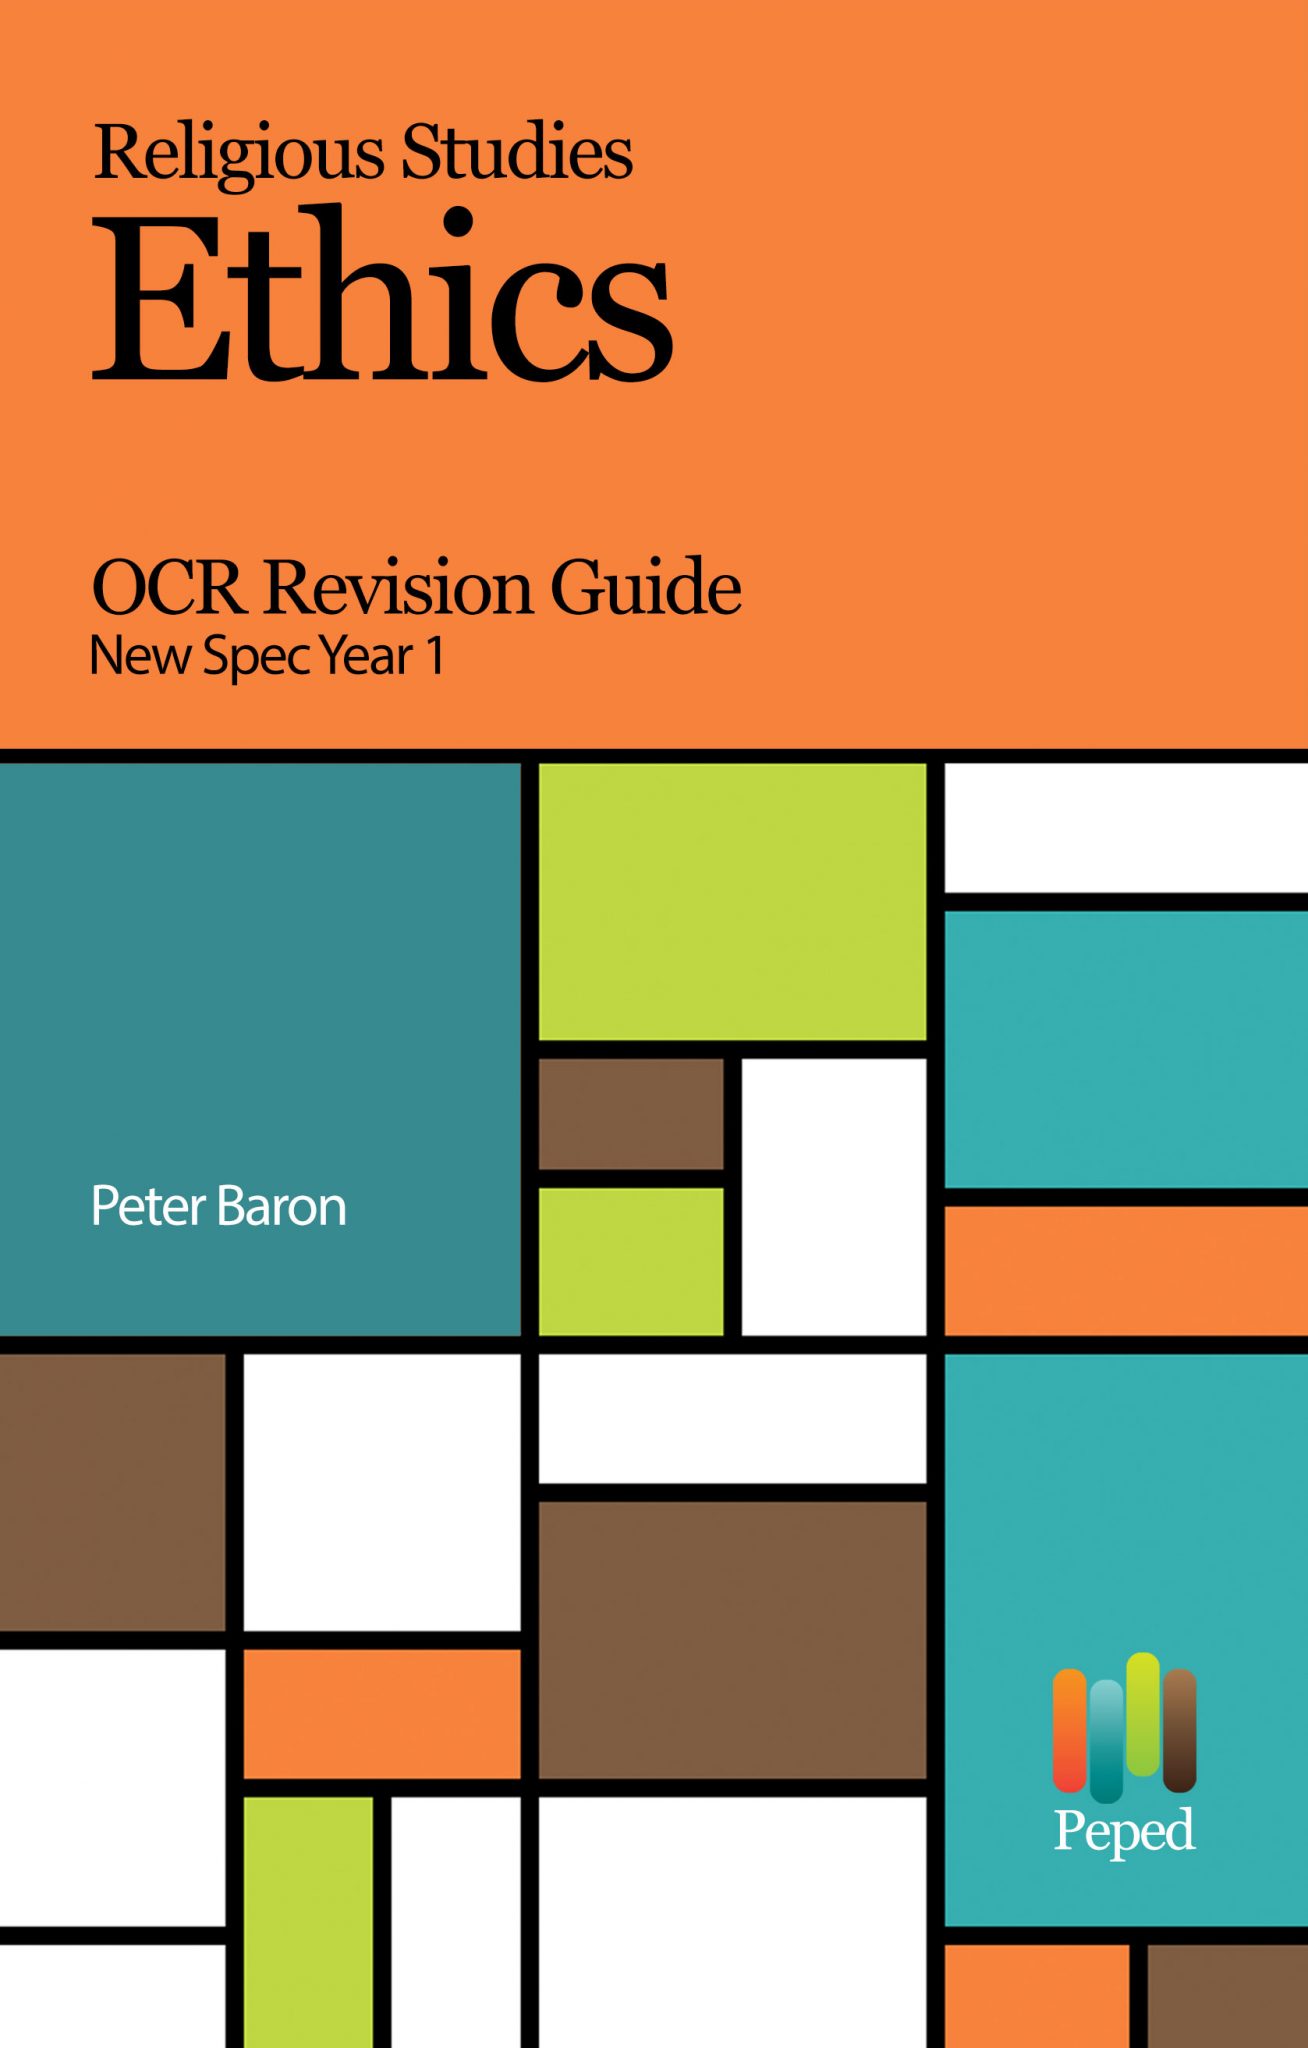 Religious Studies: Ethics OCR Revision Guide New Spec Year 1